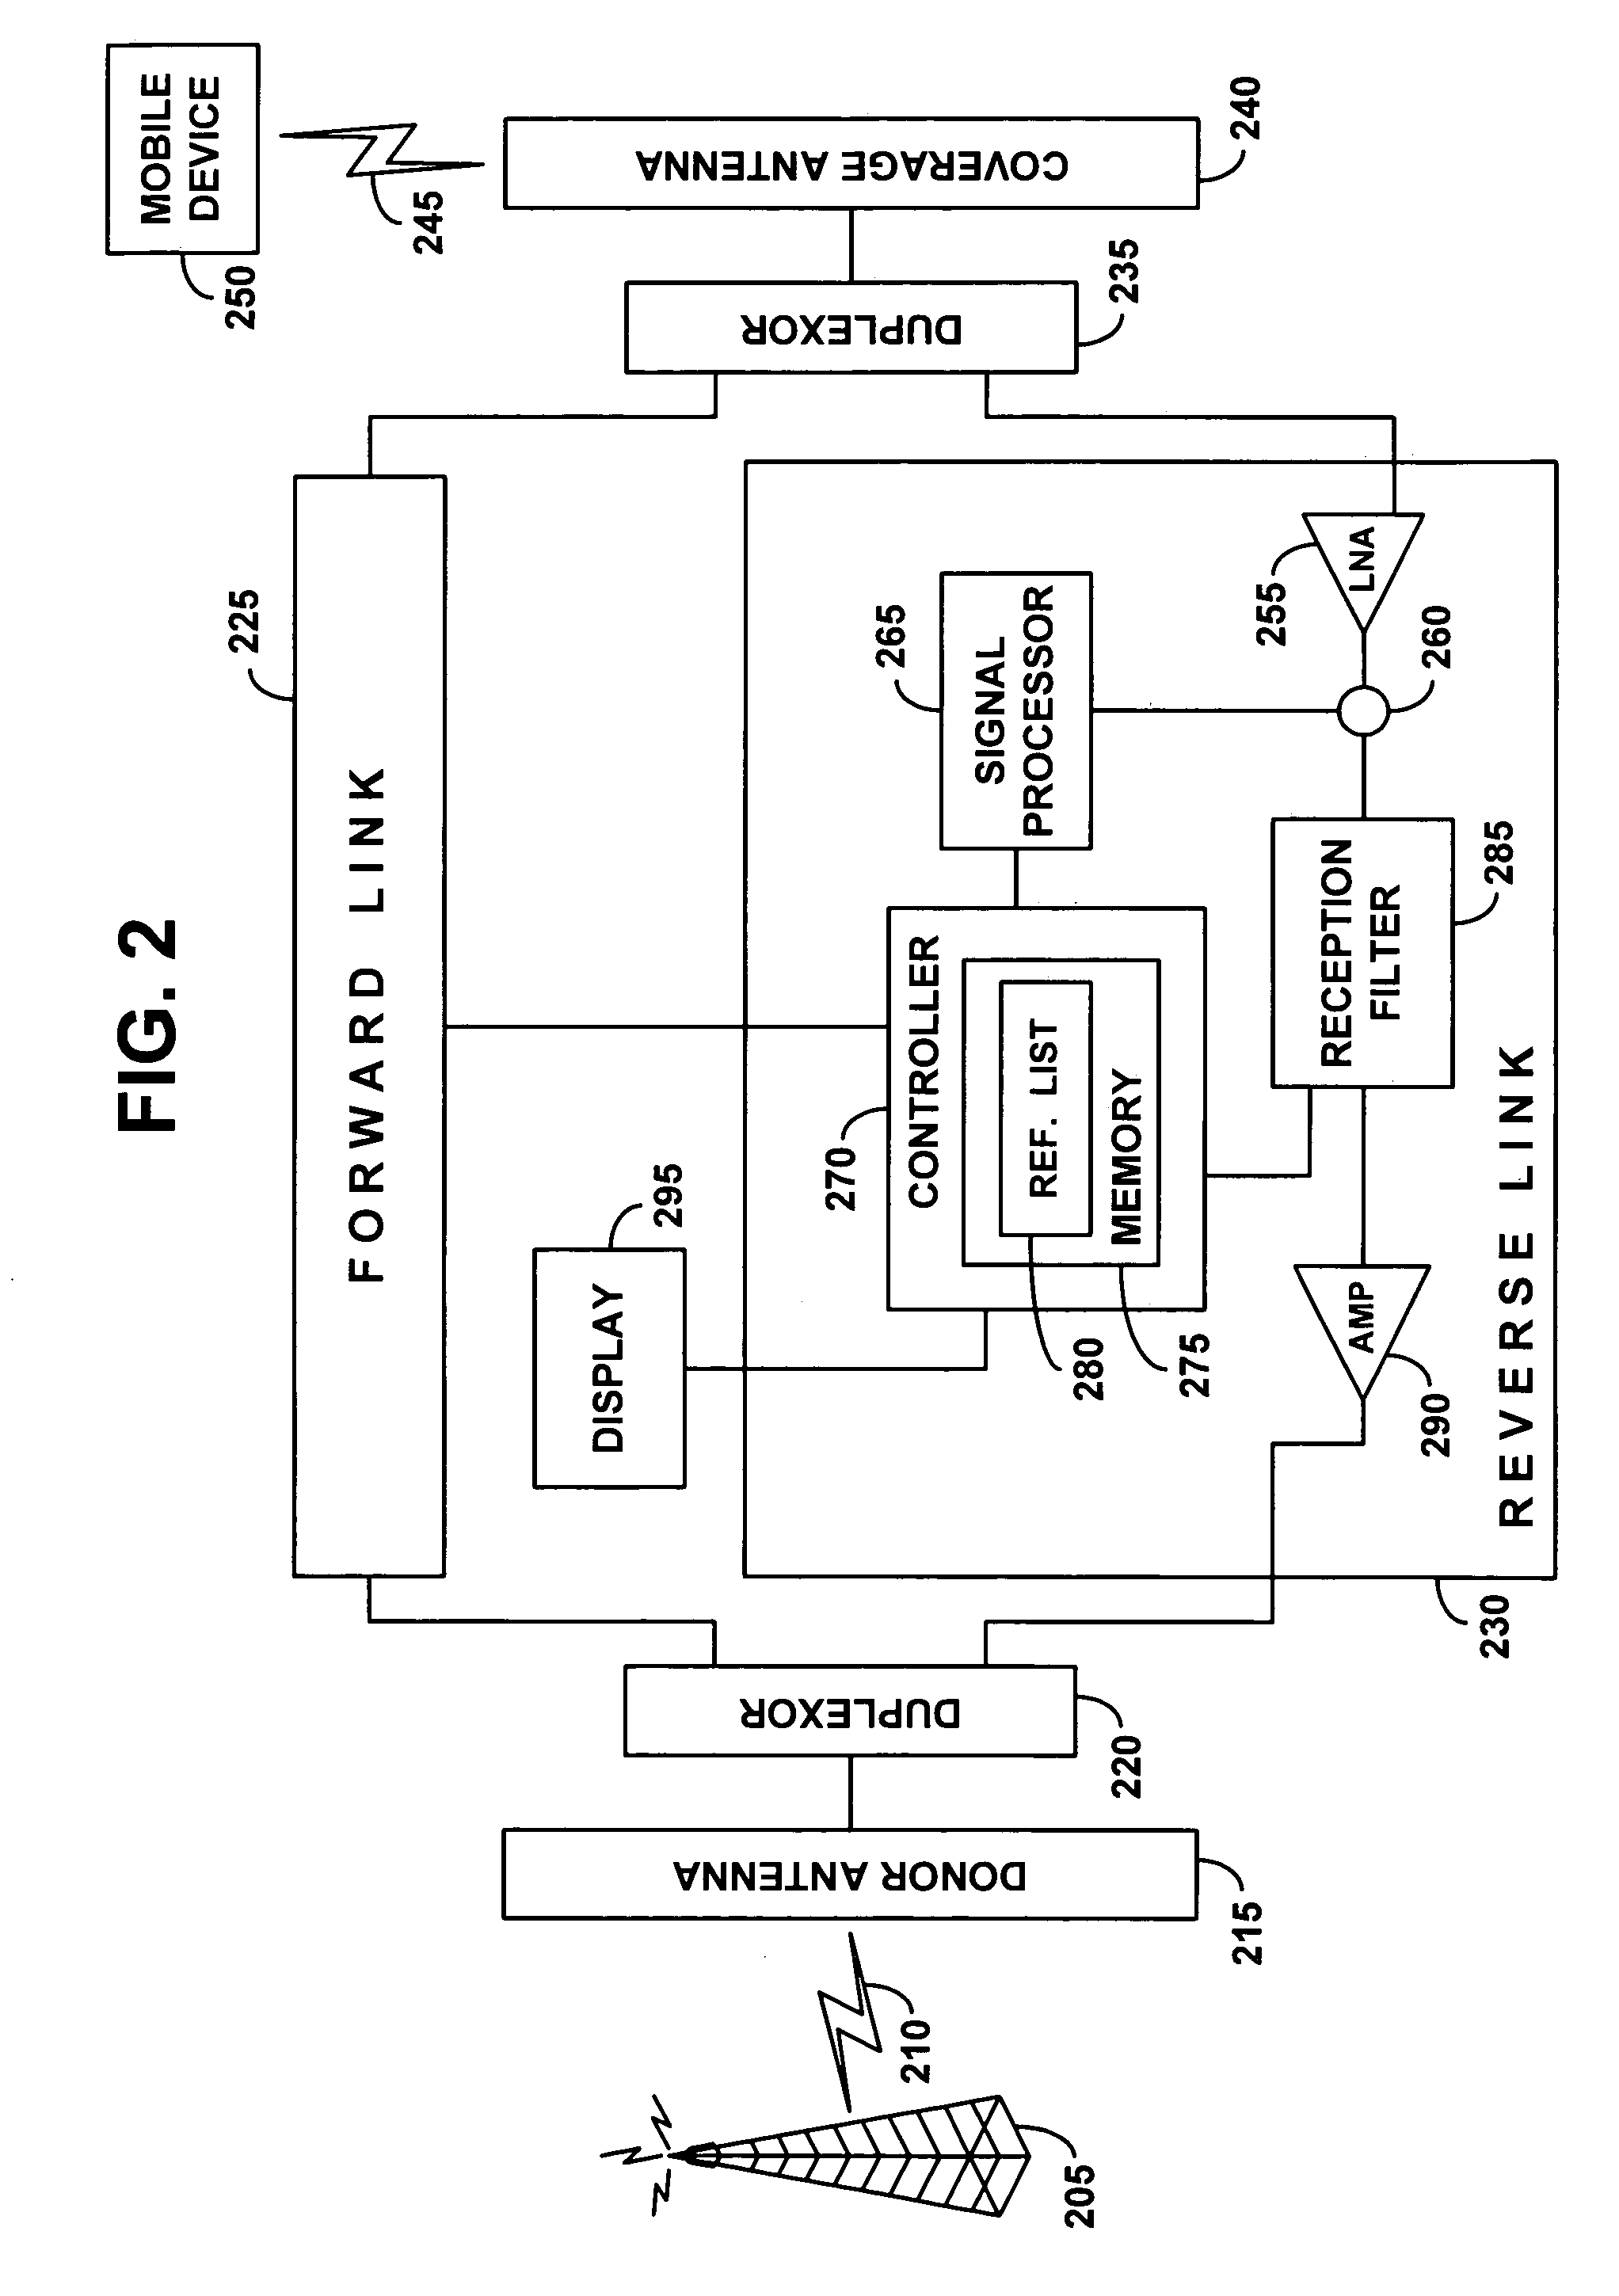 Radio frequency repeater with automated block/channel selection